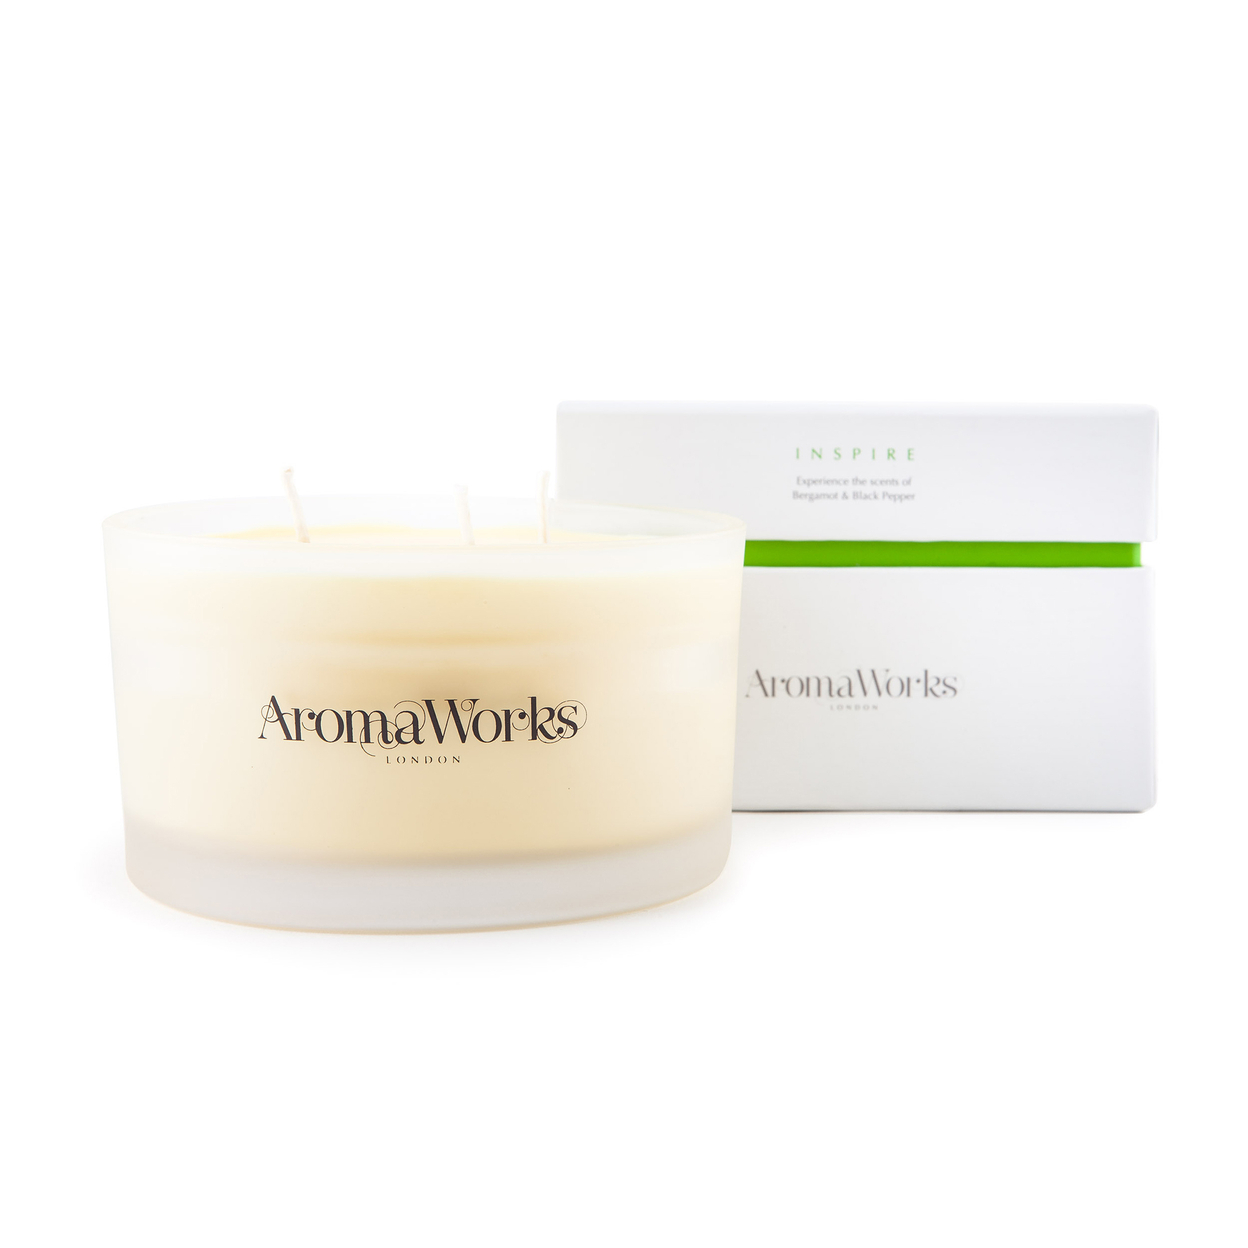 Aromaworks Inspire Candle 3 Wick Large 14.1 Oz